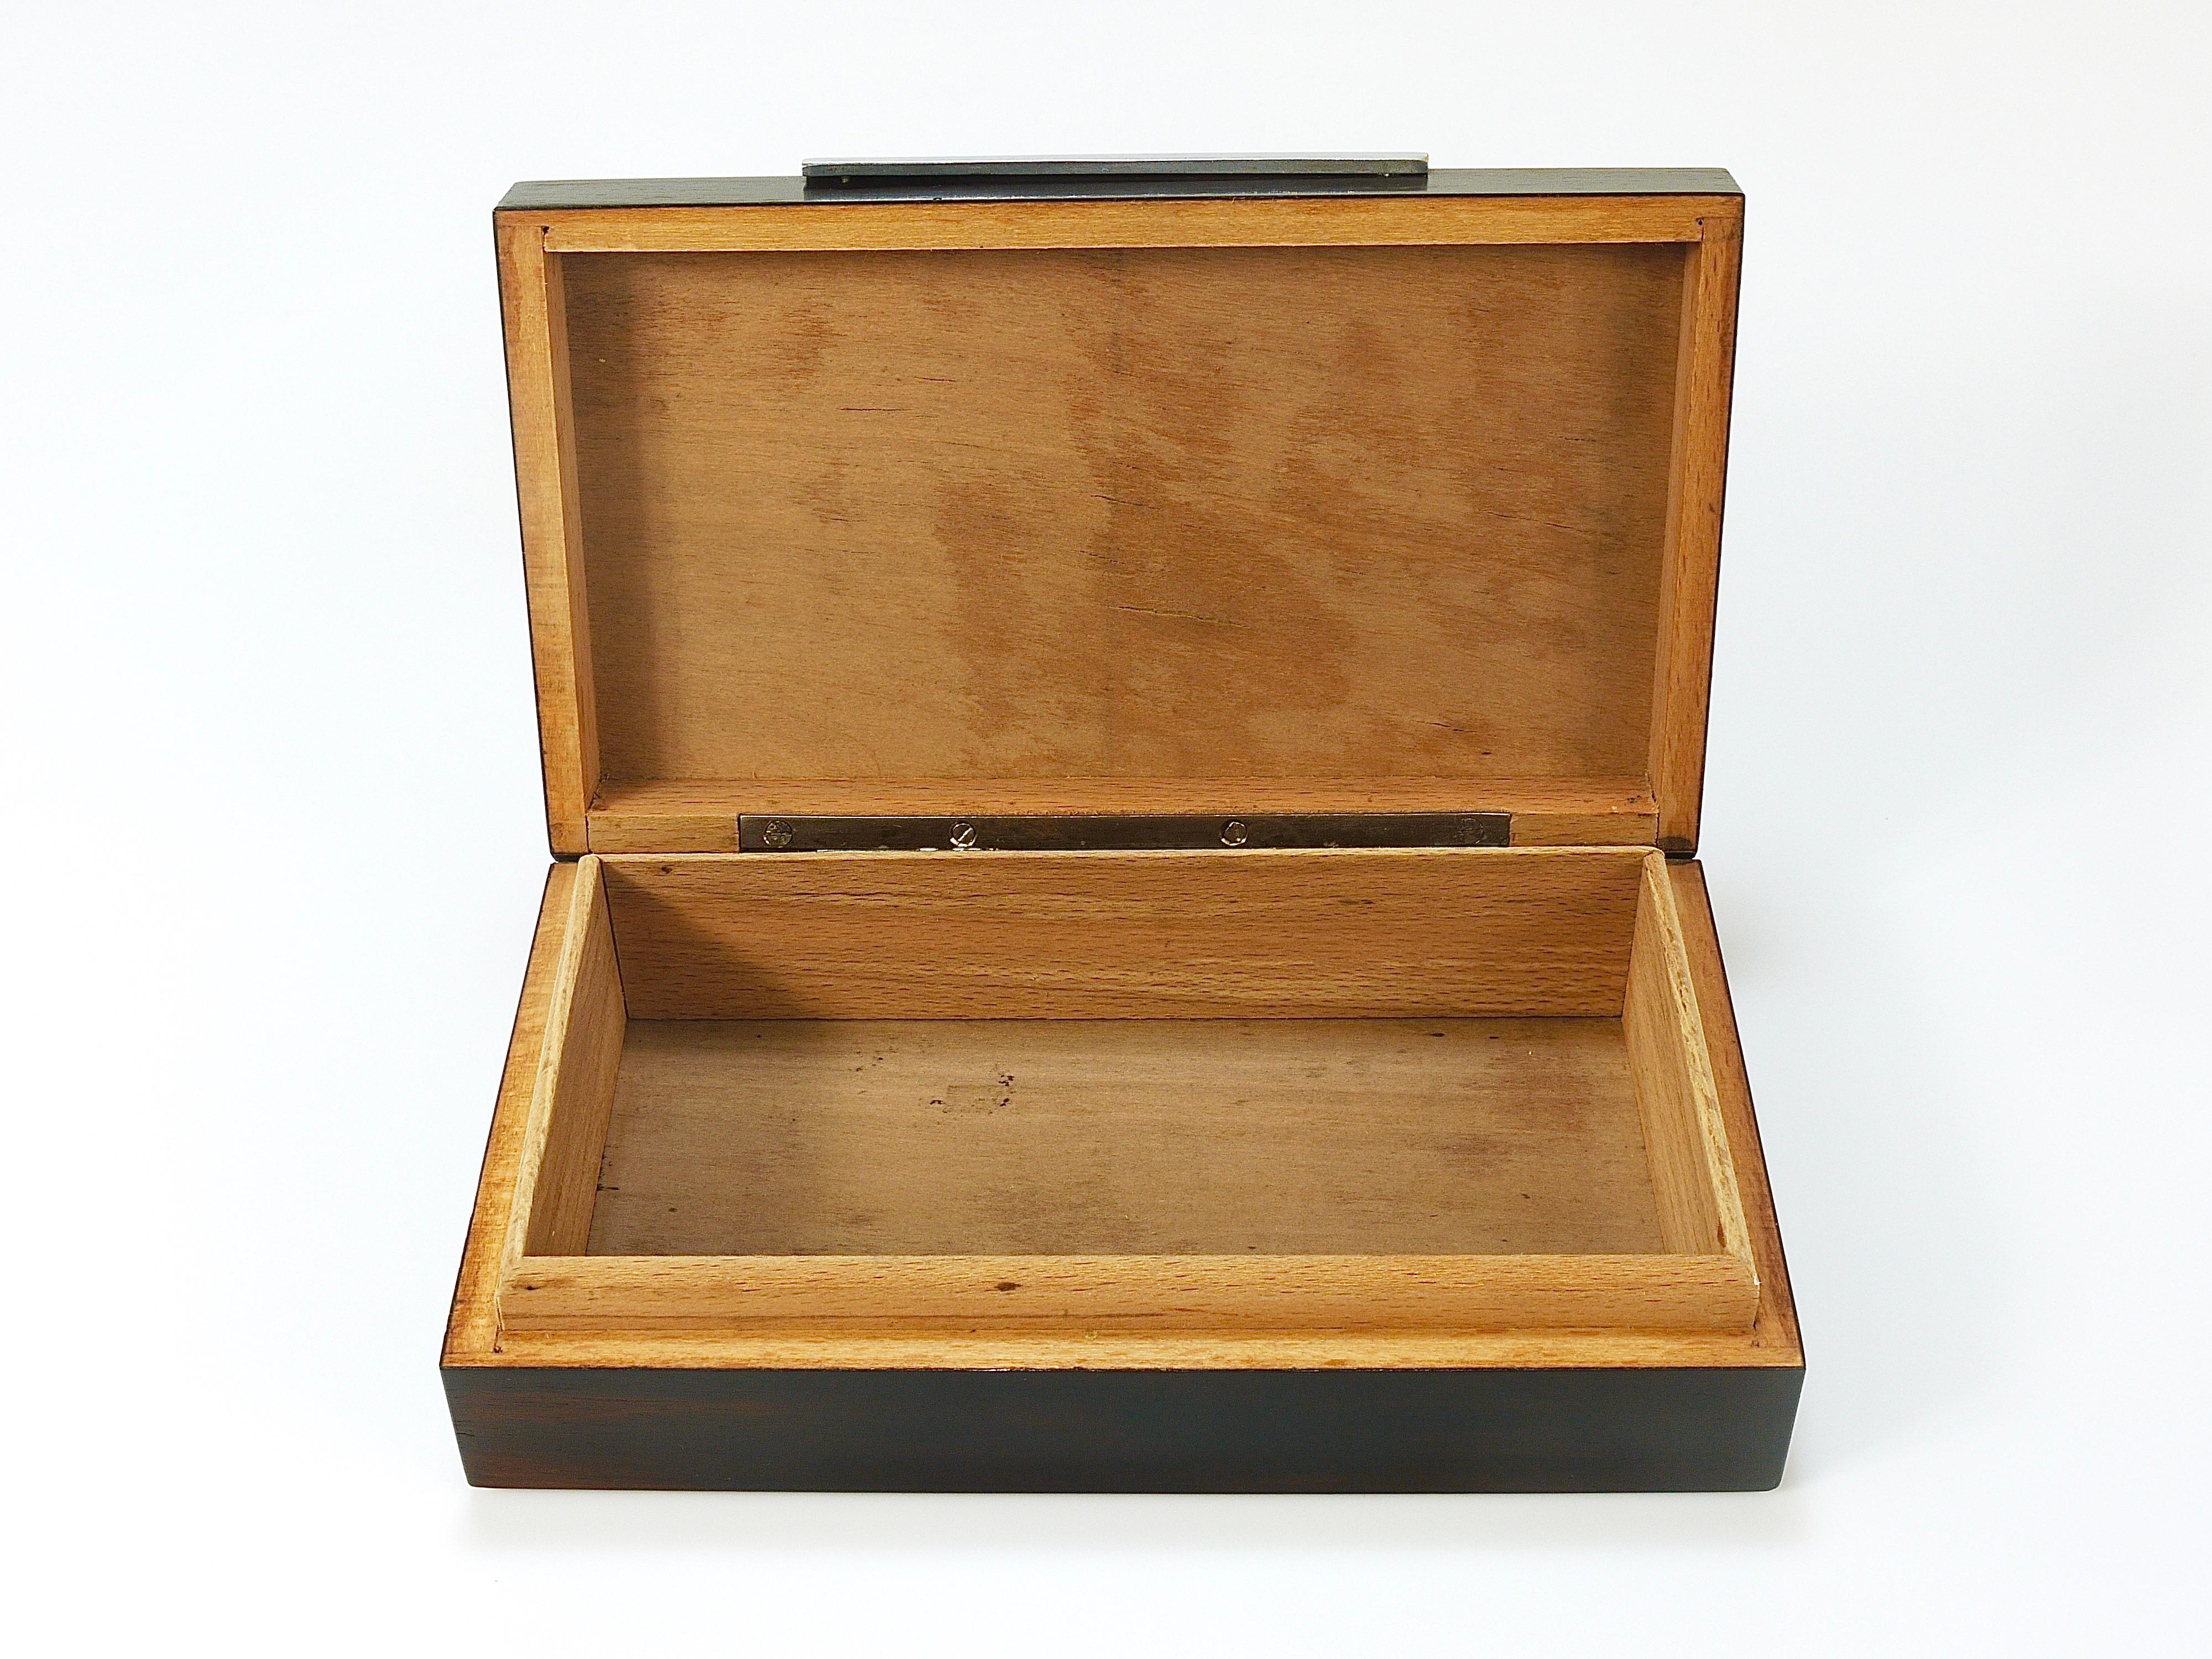 French Art Deco Rosewood & Nickel Storage Box, Maison Desny Style, France, 1930s For Sale 7